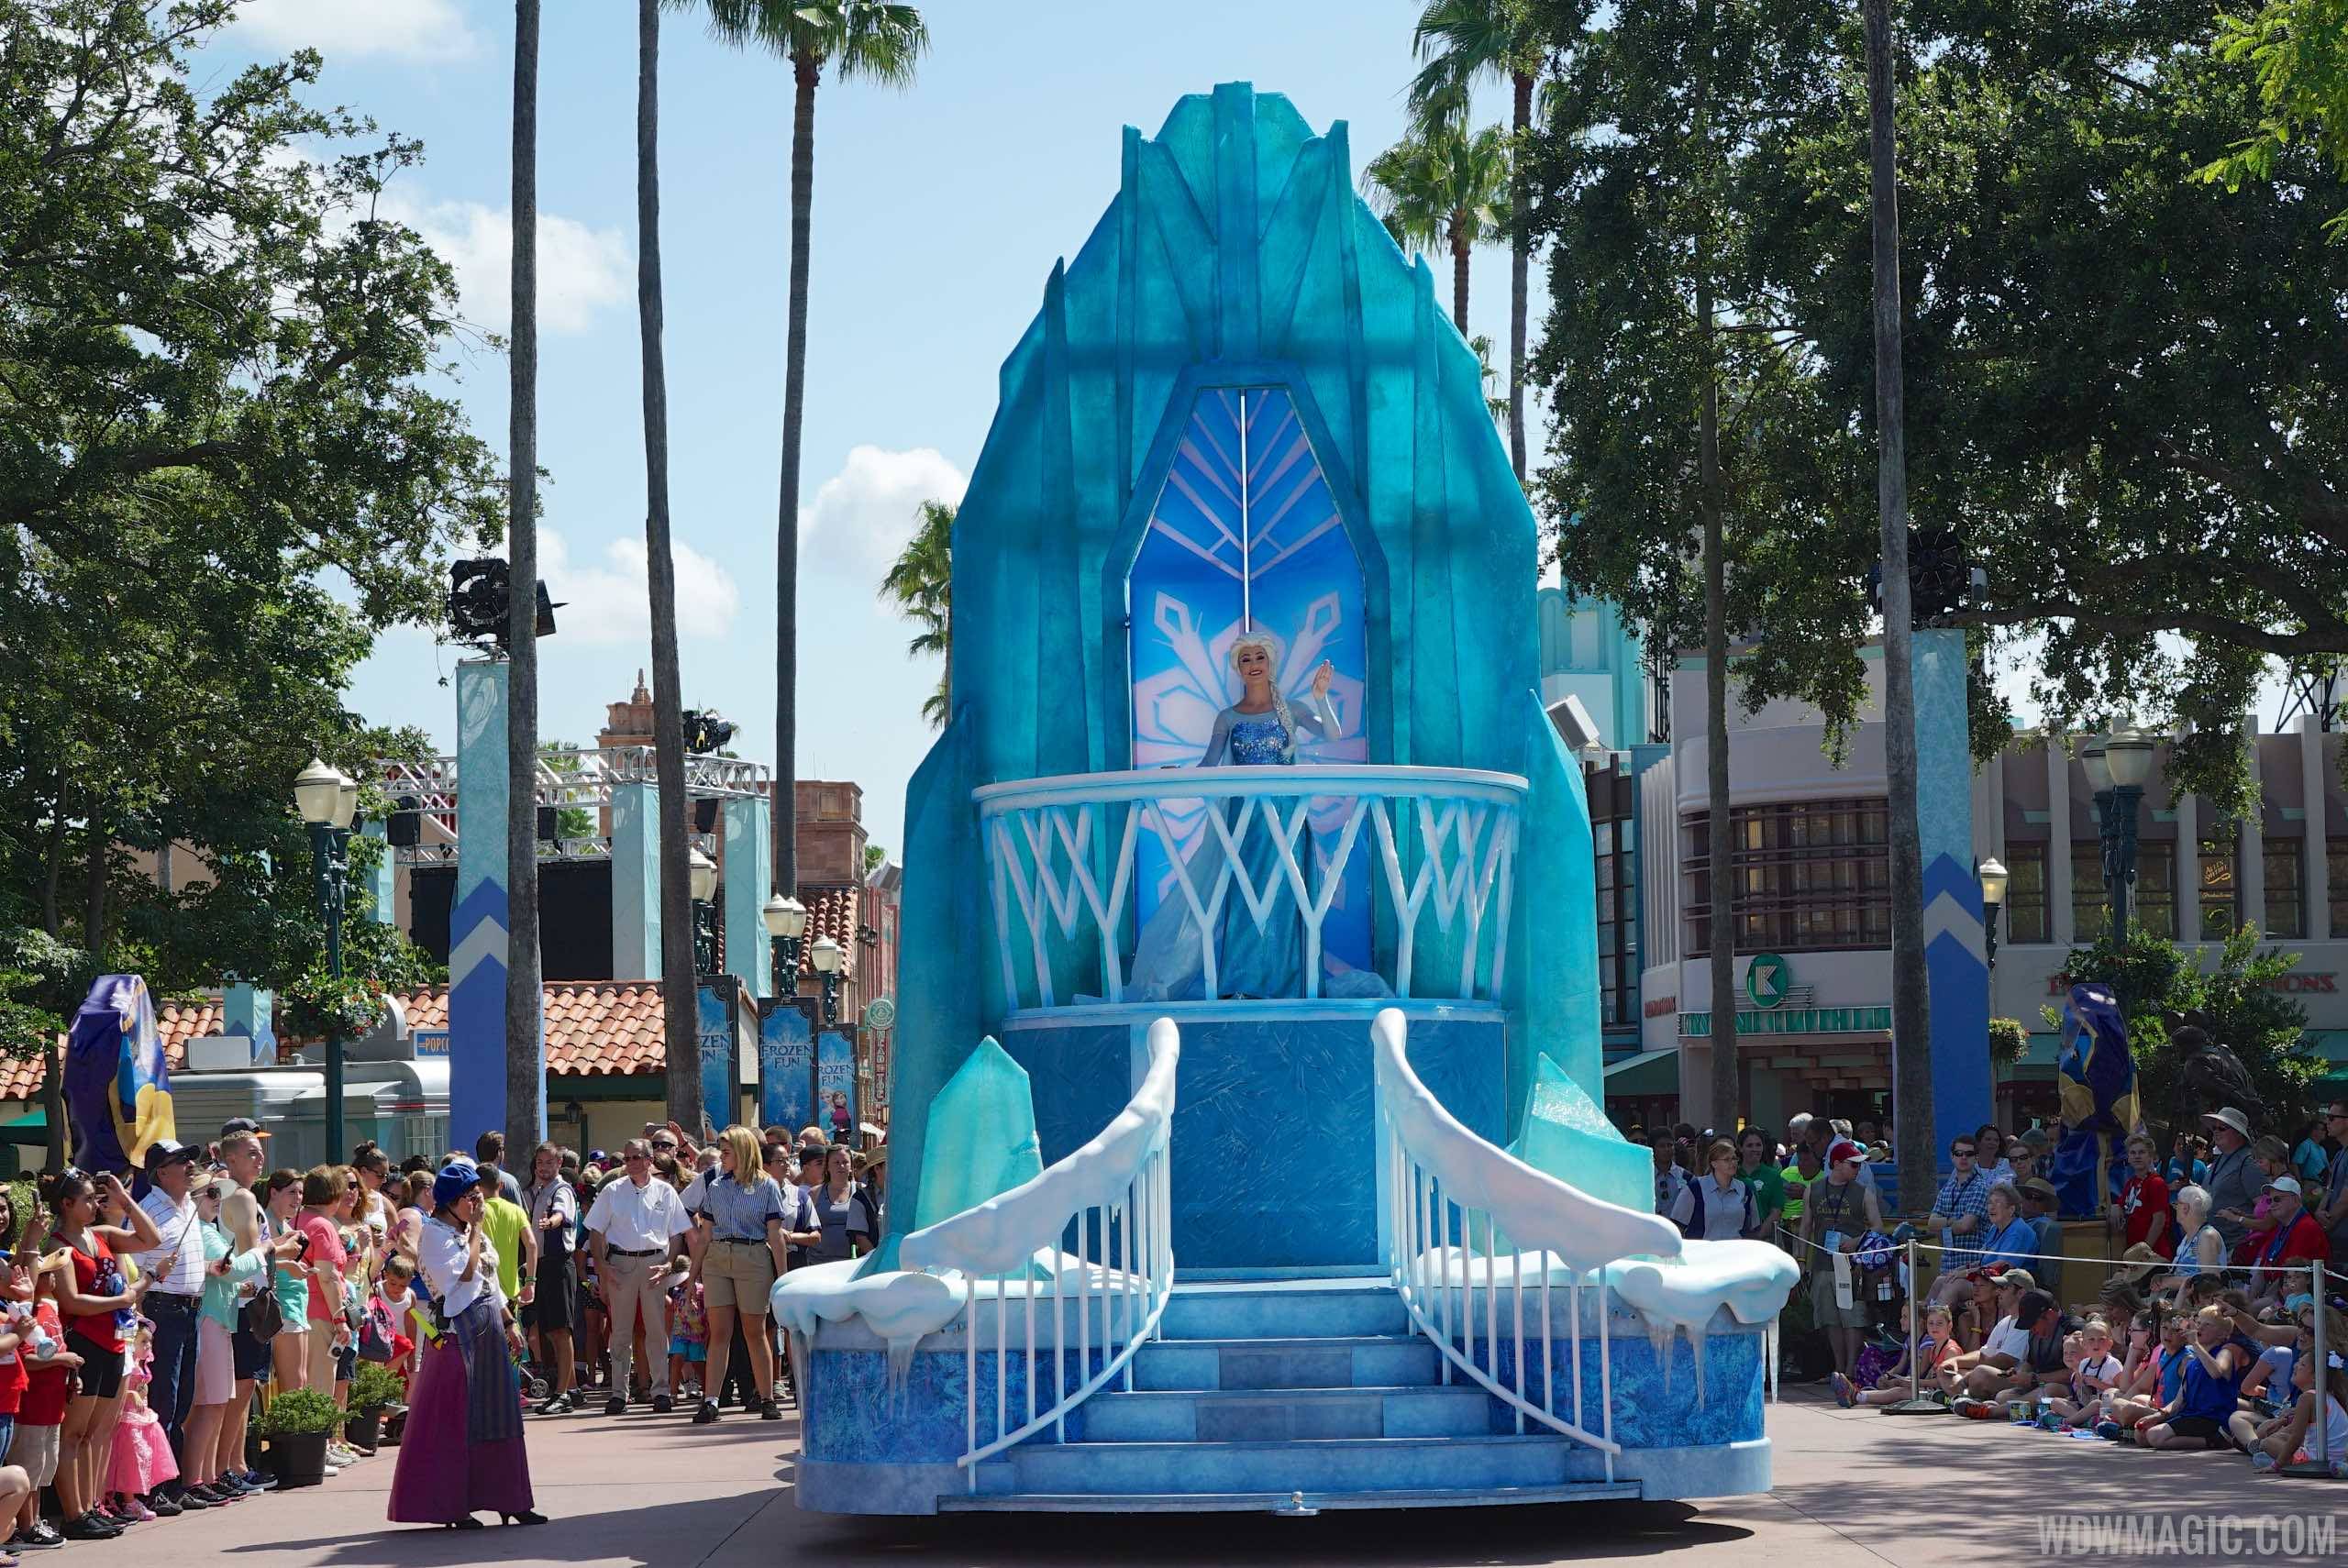 Final chance to see 'Frozen Summer Fun - Live at Disney's Hollywood Studios' this weekend